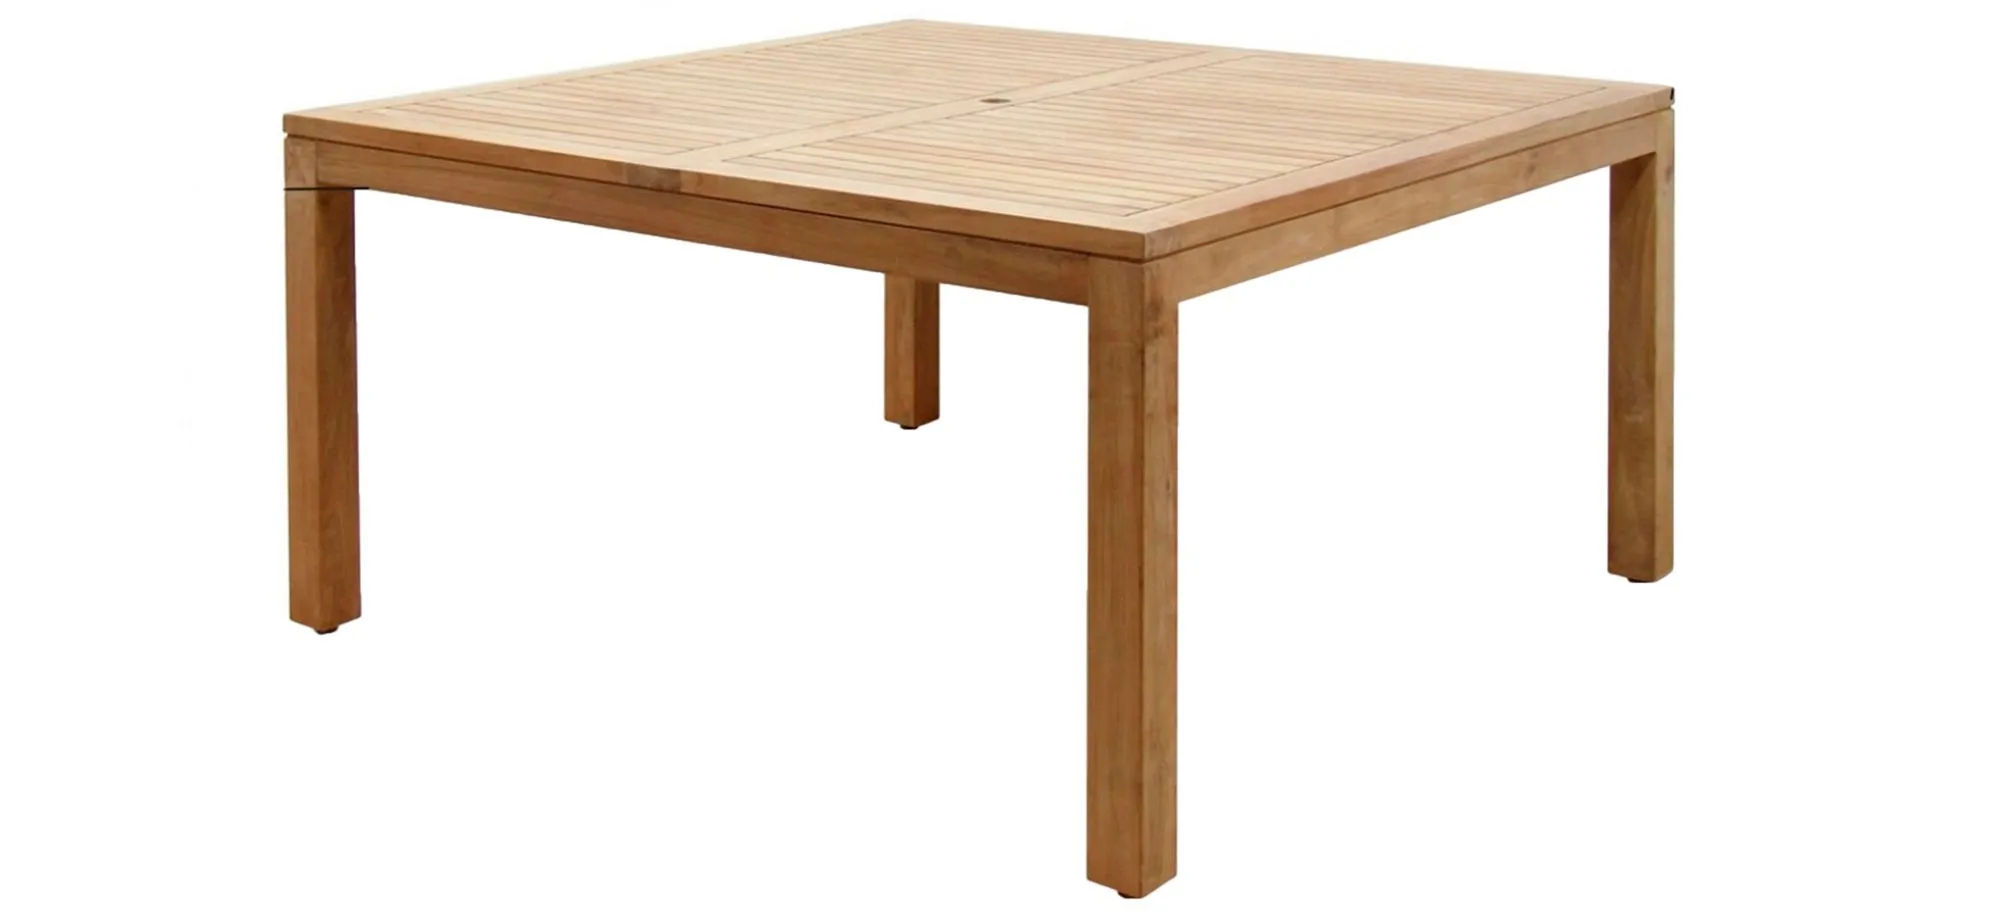 Amazonia Outdoor Teak Square Dining Table in Brown by International Home Miami